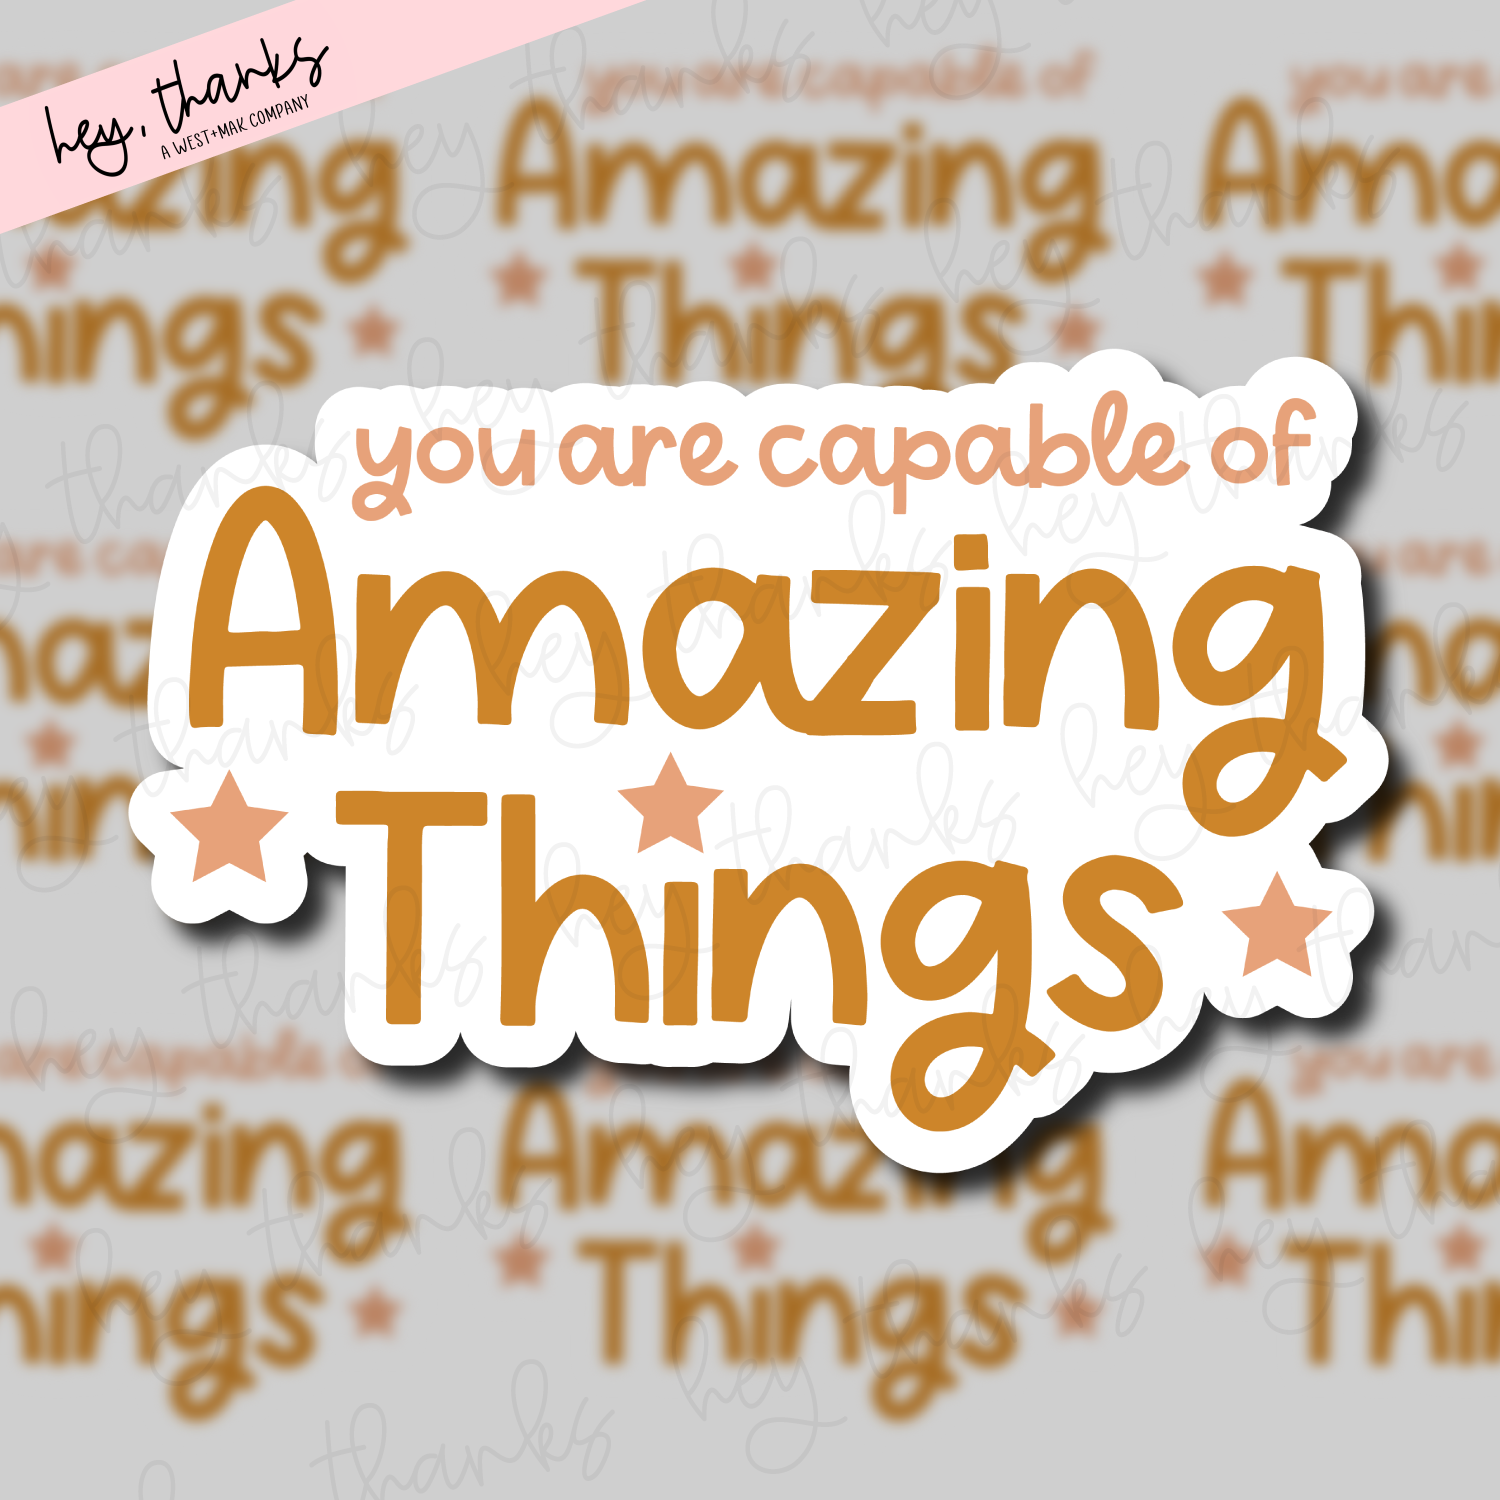 You Are Capable of Amazing Things